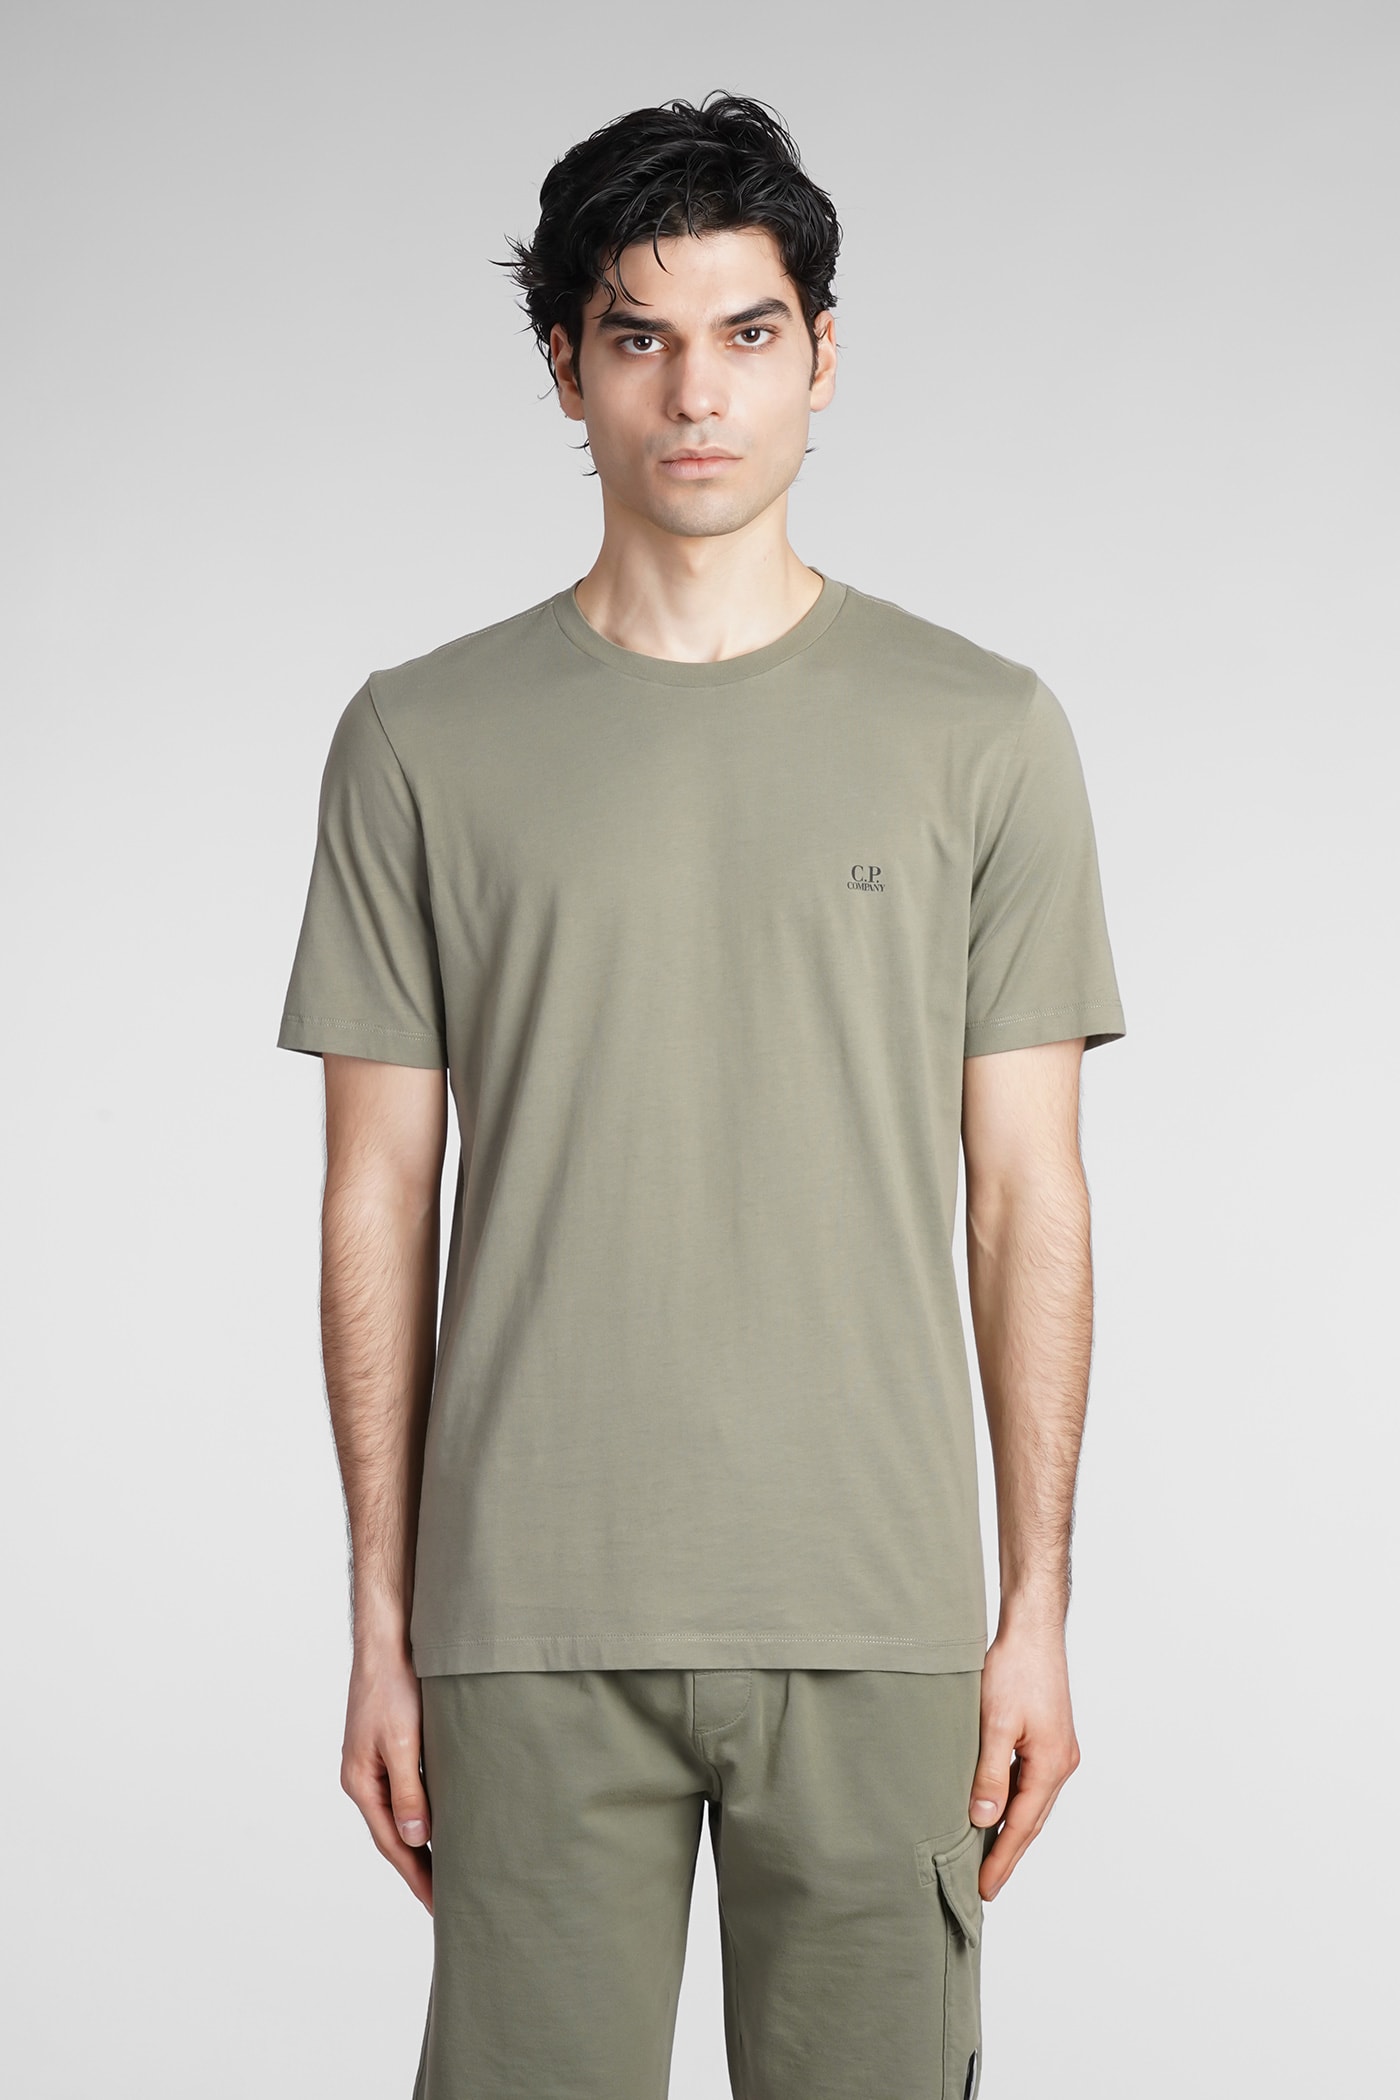 C.P. COMPANY T-SHIRT IN GREEN COTTON